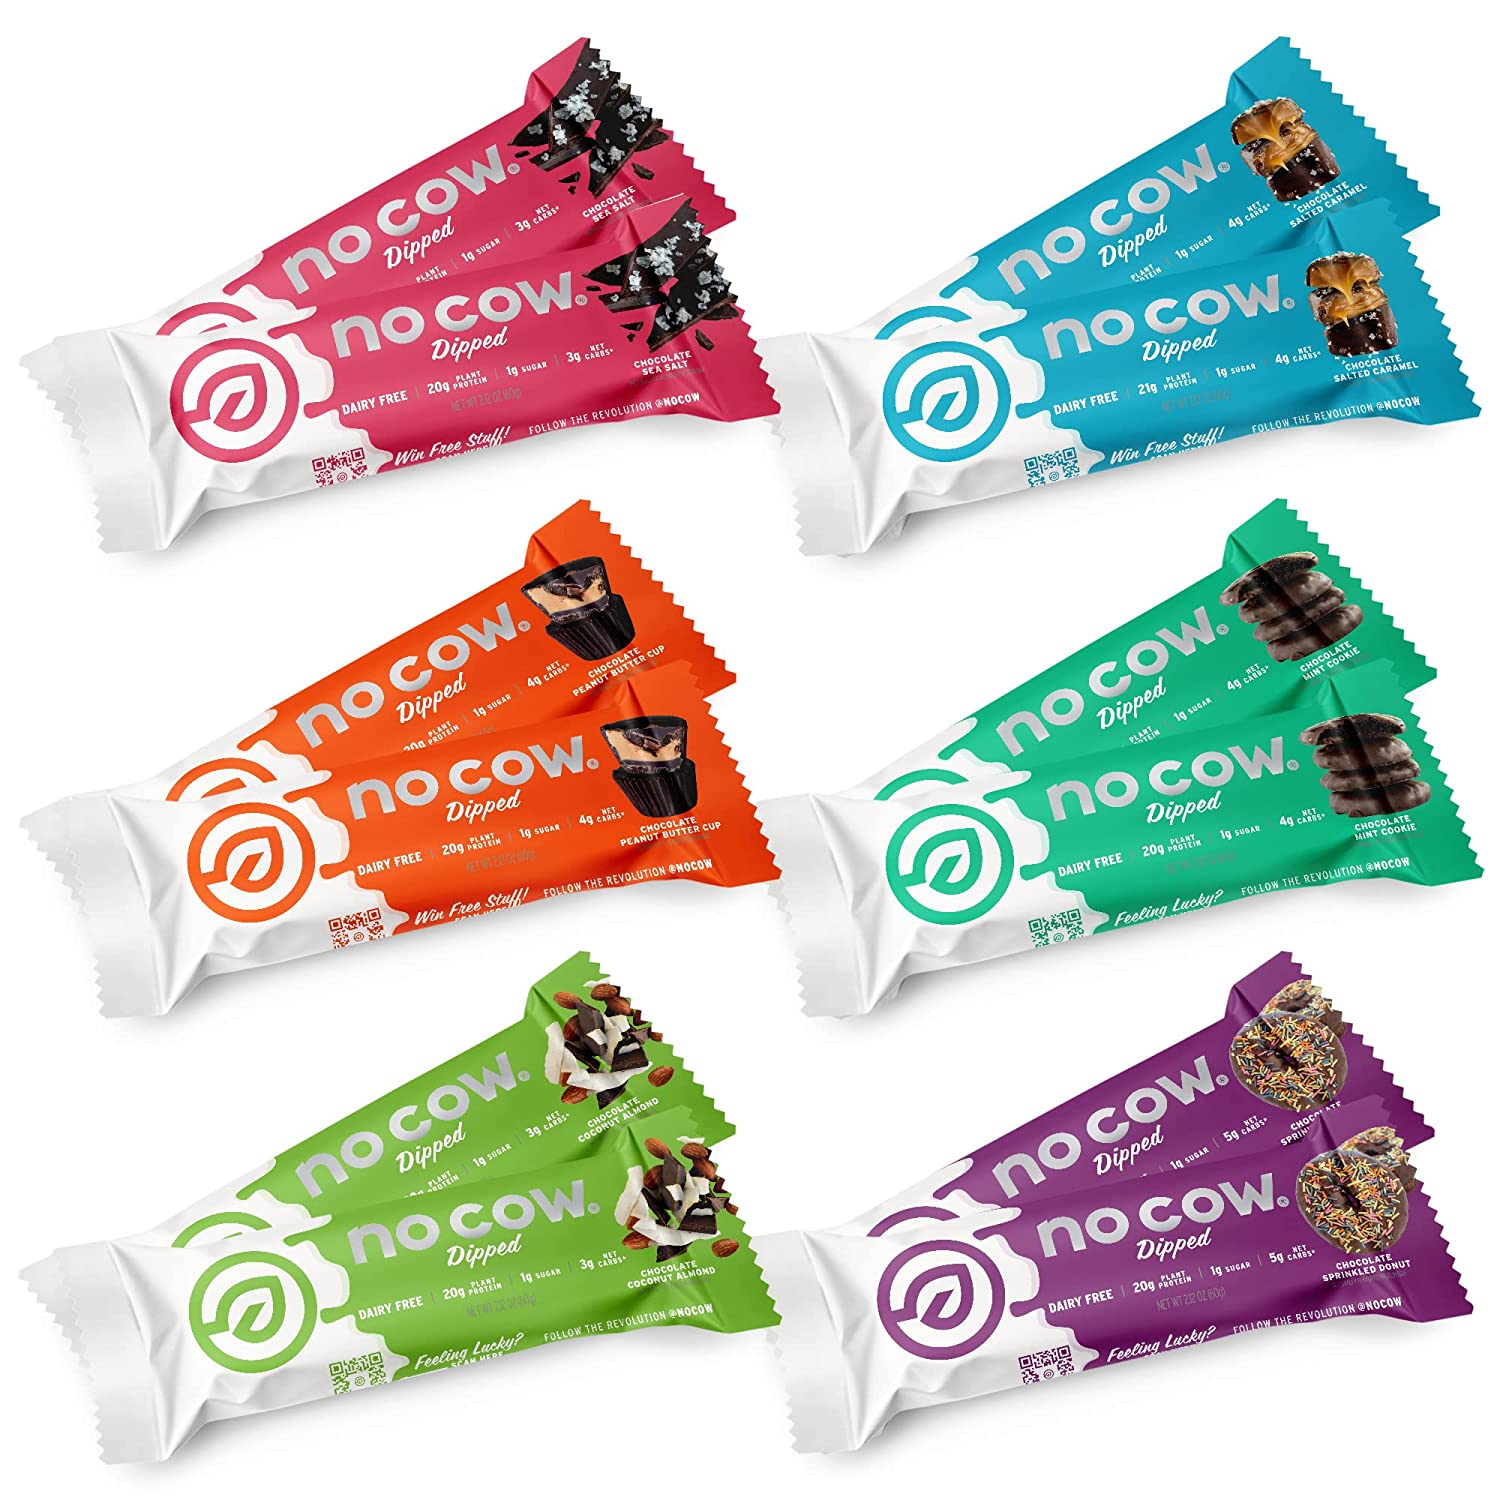 No Cow Dipped Certified Gluten Free Meal Replacement Bars